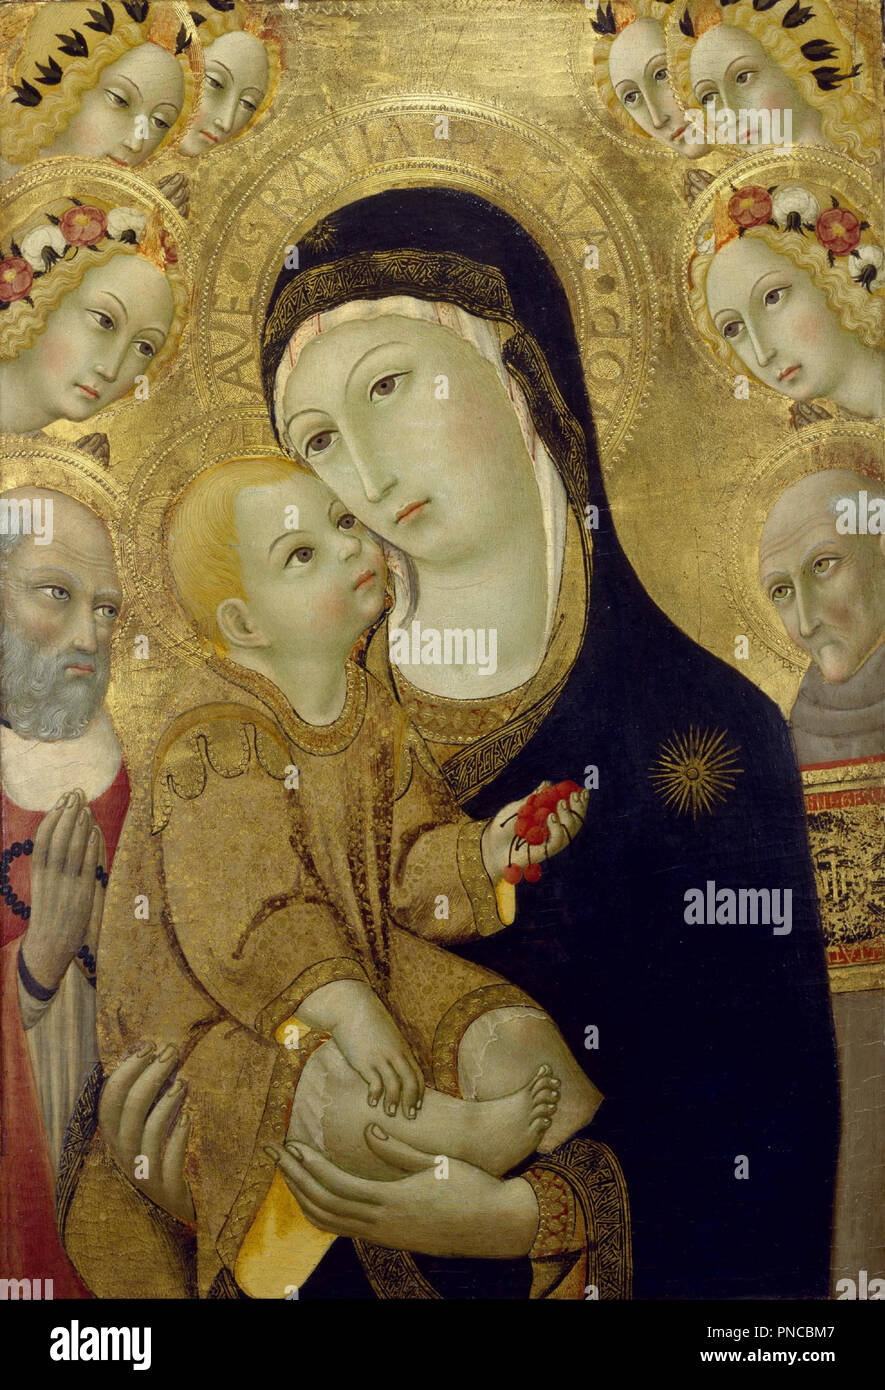 Virgin and Child with Saints Jerome and Bernardino of Siena and Six Angels. Date/Period: 1460/1469. Painting. Tempera and gold leaf on wood. Width: 40.6 cm. Height: 59.7 cm (without frame). Author: SANO DI PIETRO. Stock Photo